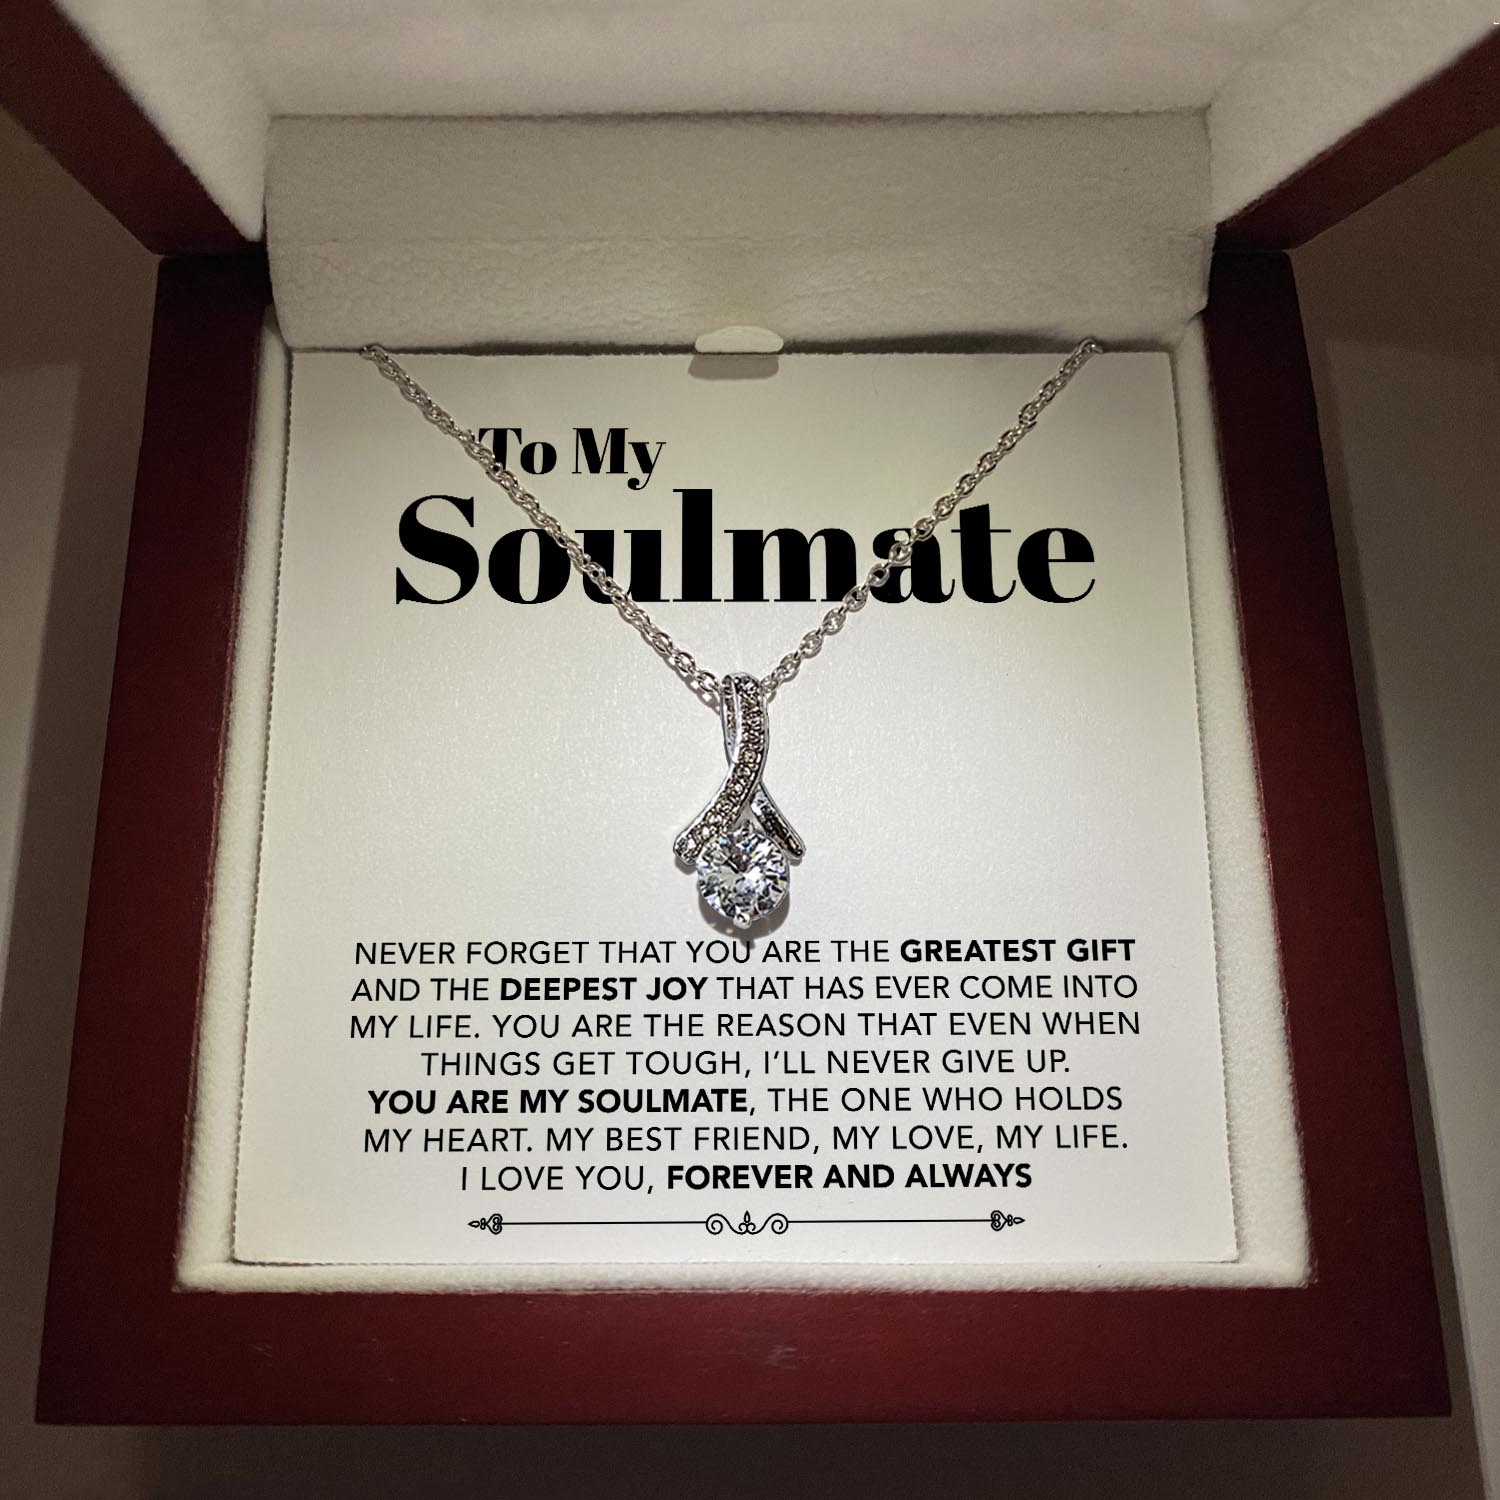 GlowUp Luxury LED Box To My Soulmate - My Best Friend, My Love, My Life - Ribbon Necklace